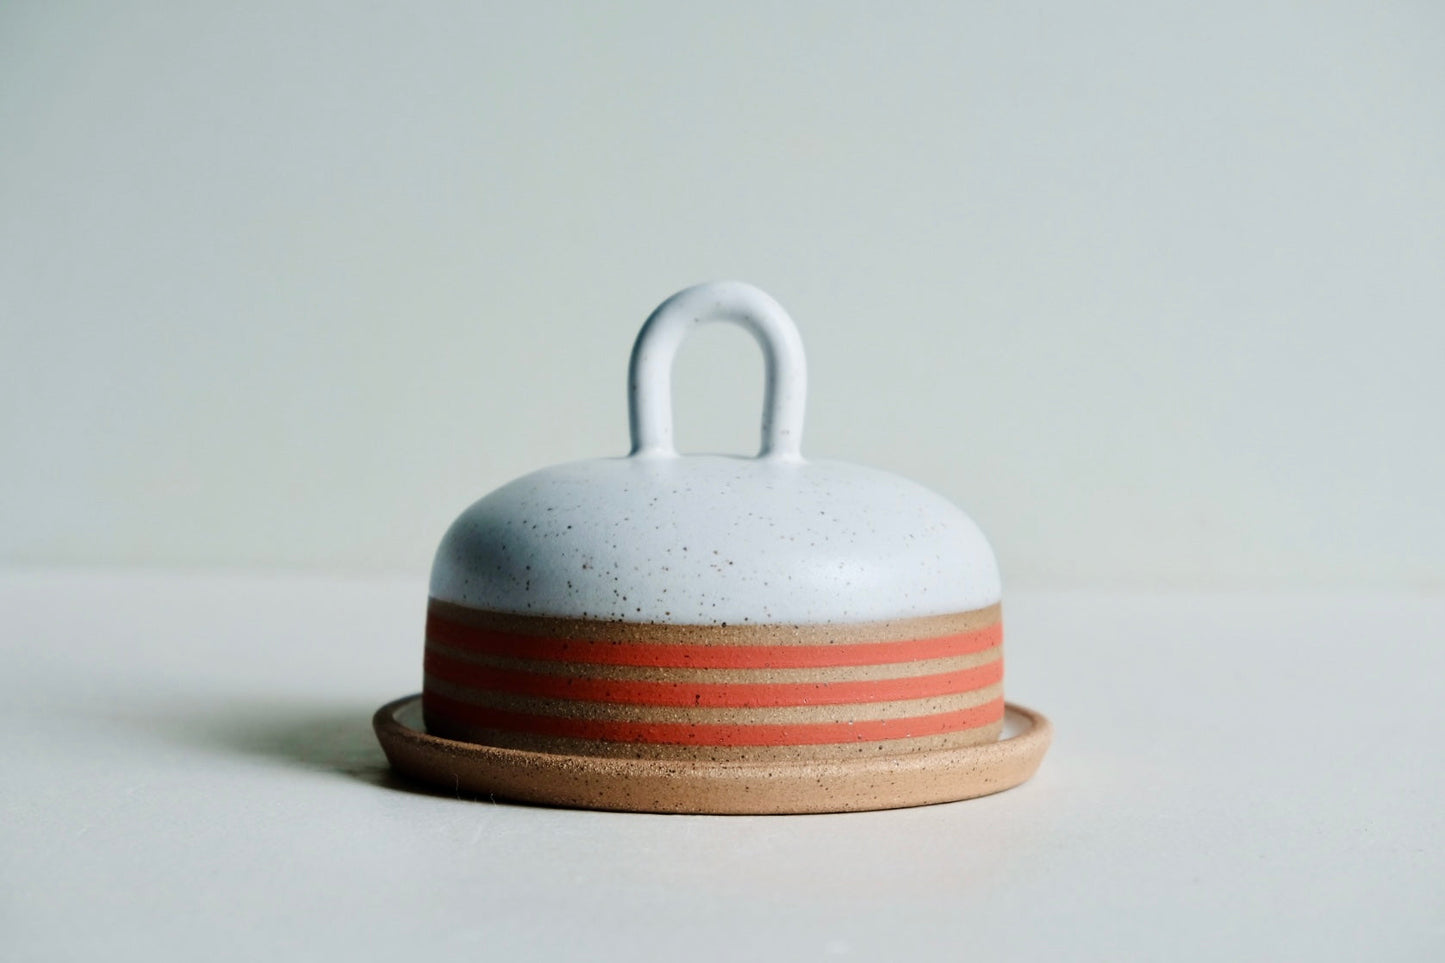 A round butter dish dipped in white satin glaze with a ring of red stripes at the bottom. A cute little handle, too.